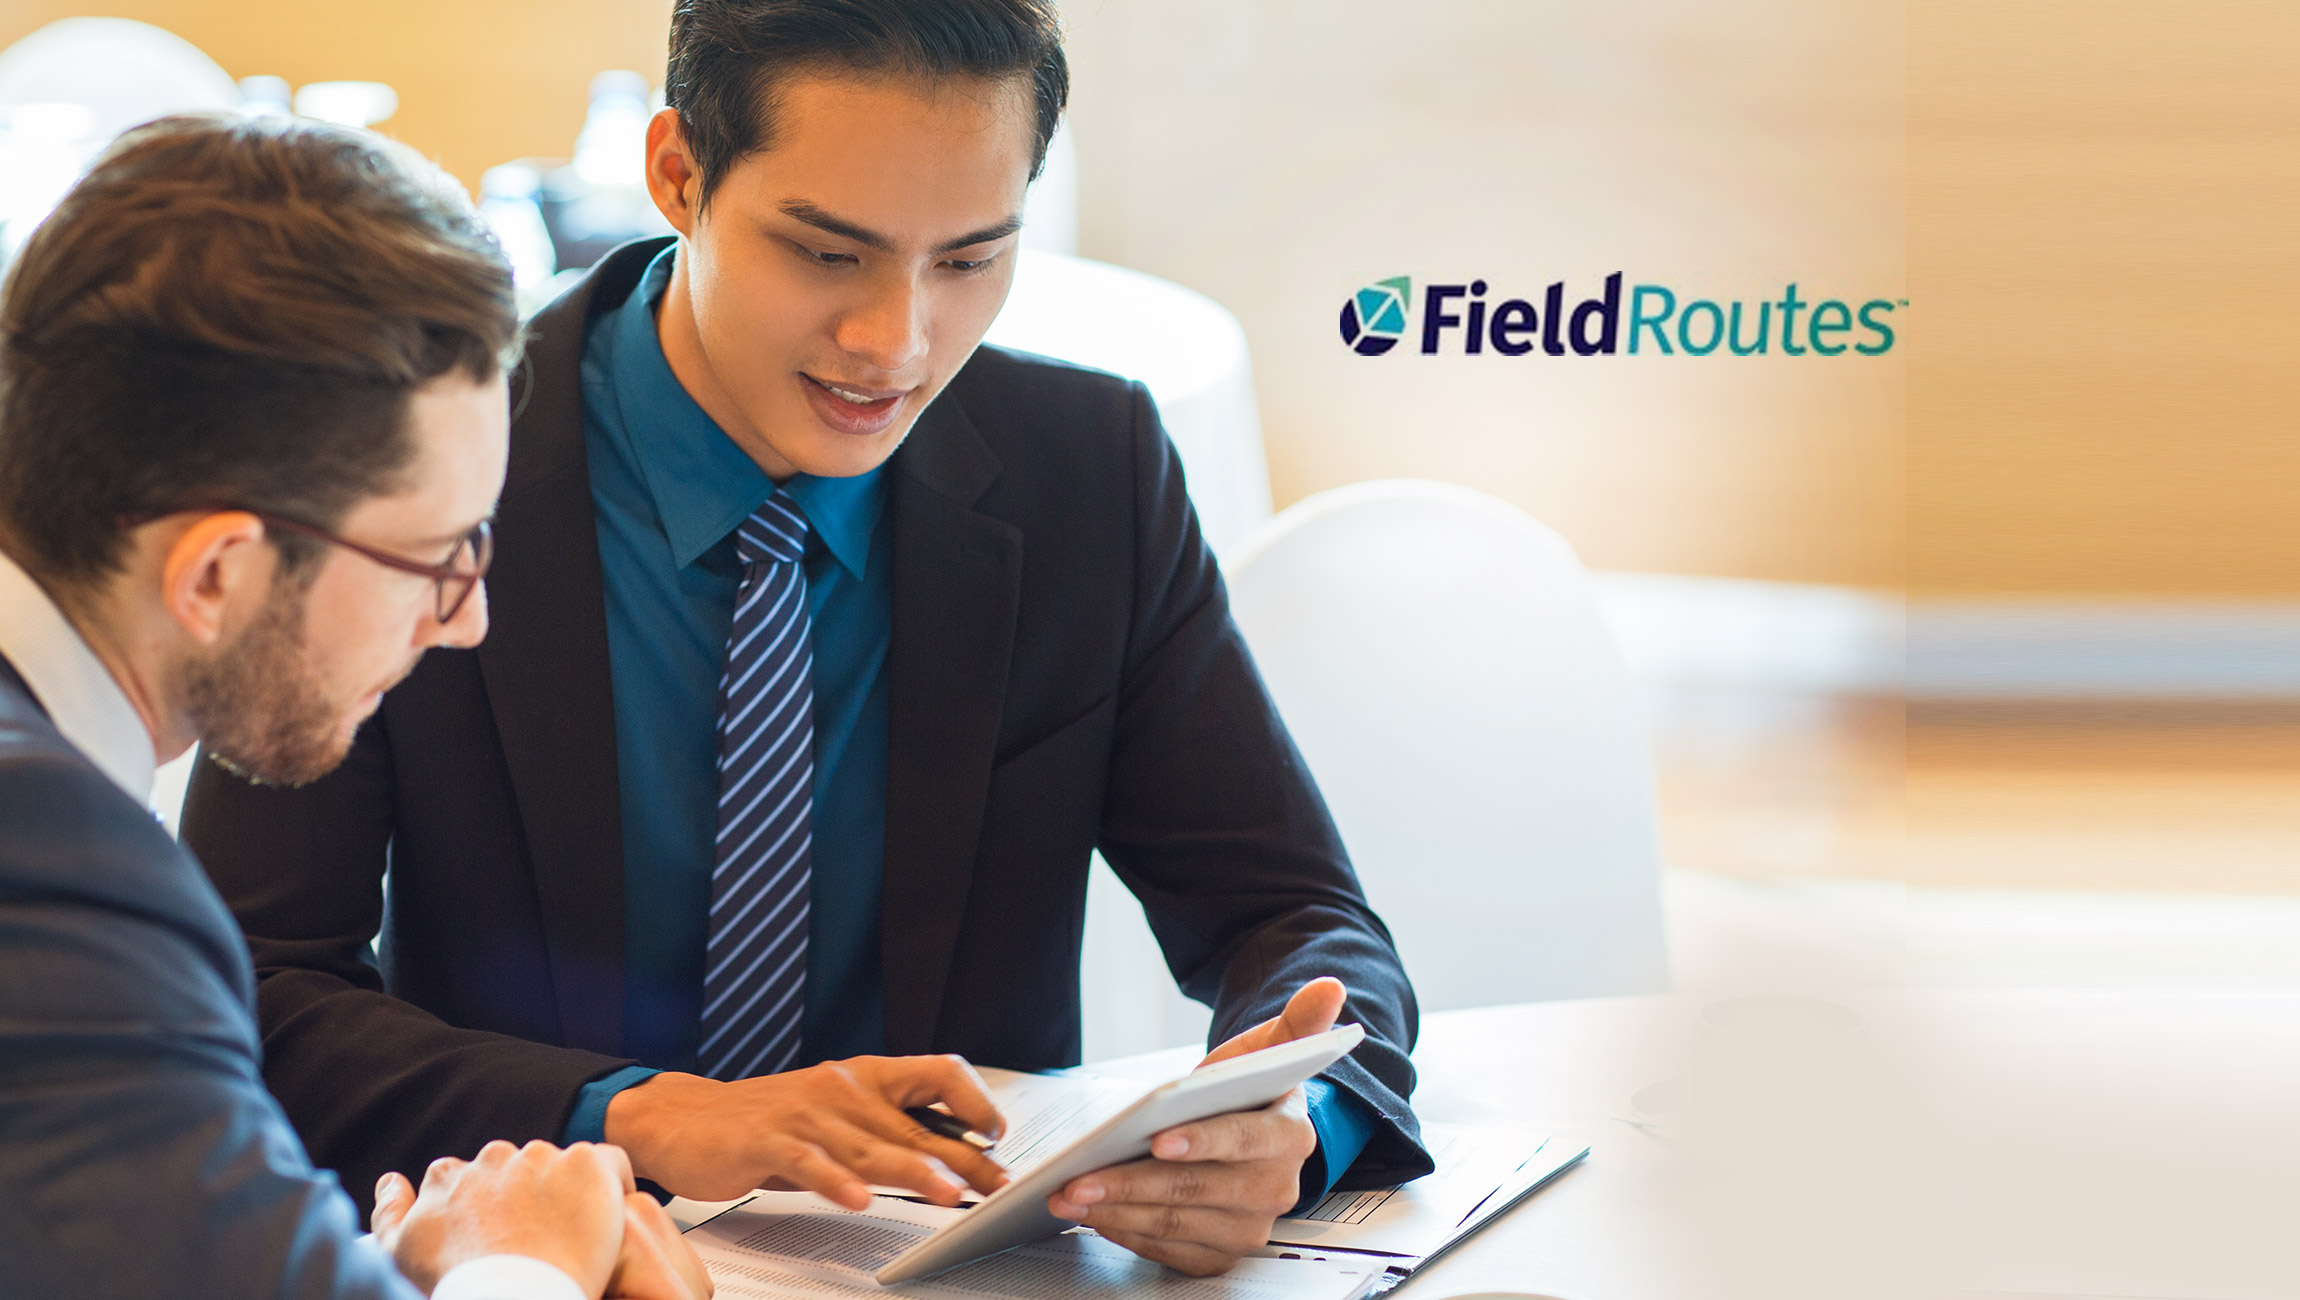 FieldRoutes Supports Customers' Rights To Their Data With New Declaration